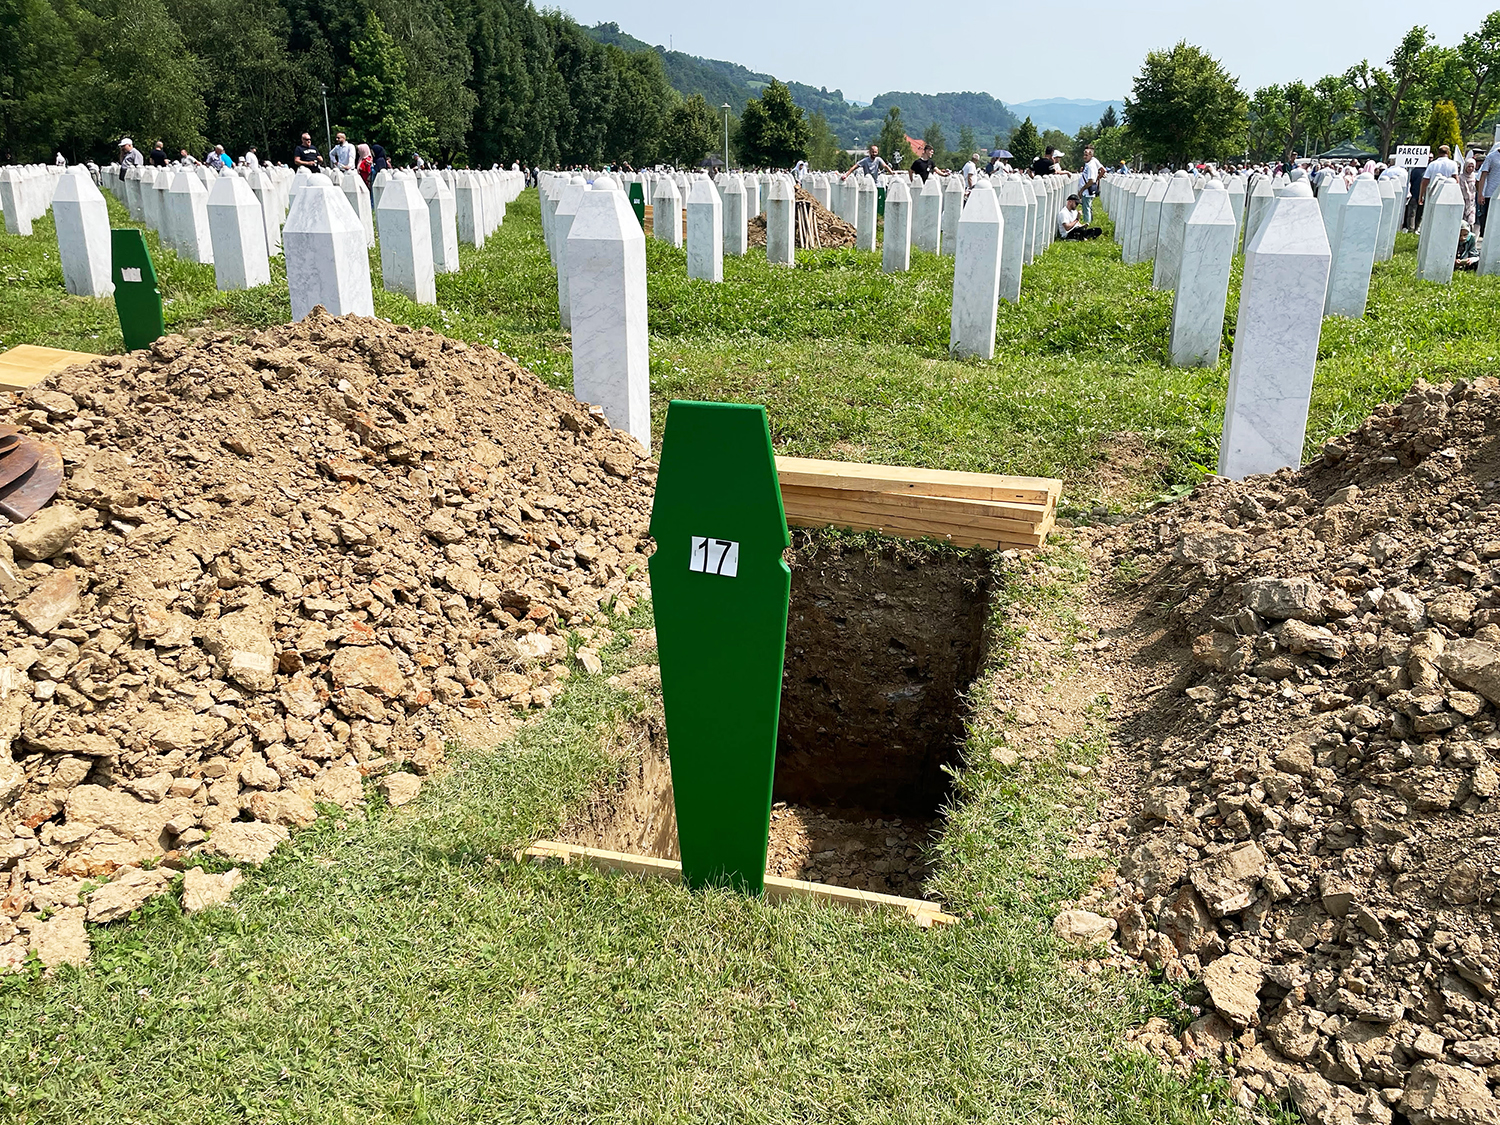 An gravesite waits empty and marked with a number during the Srebrenica Genocide Commemoration in early July. A number of remains were returned to the site as part of the commemoration ceremony. Photo by David Ian Klein